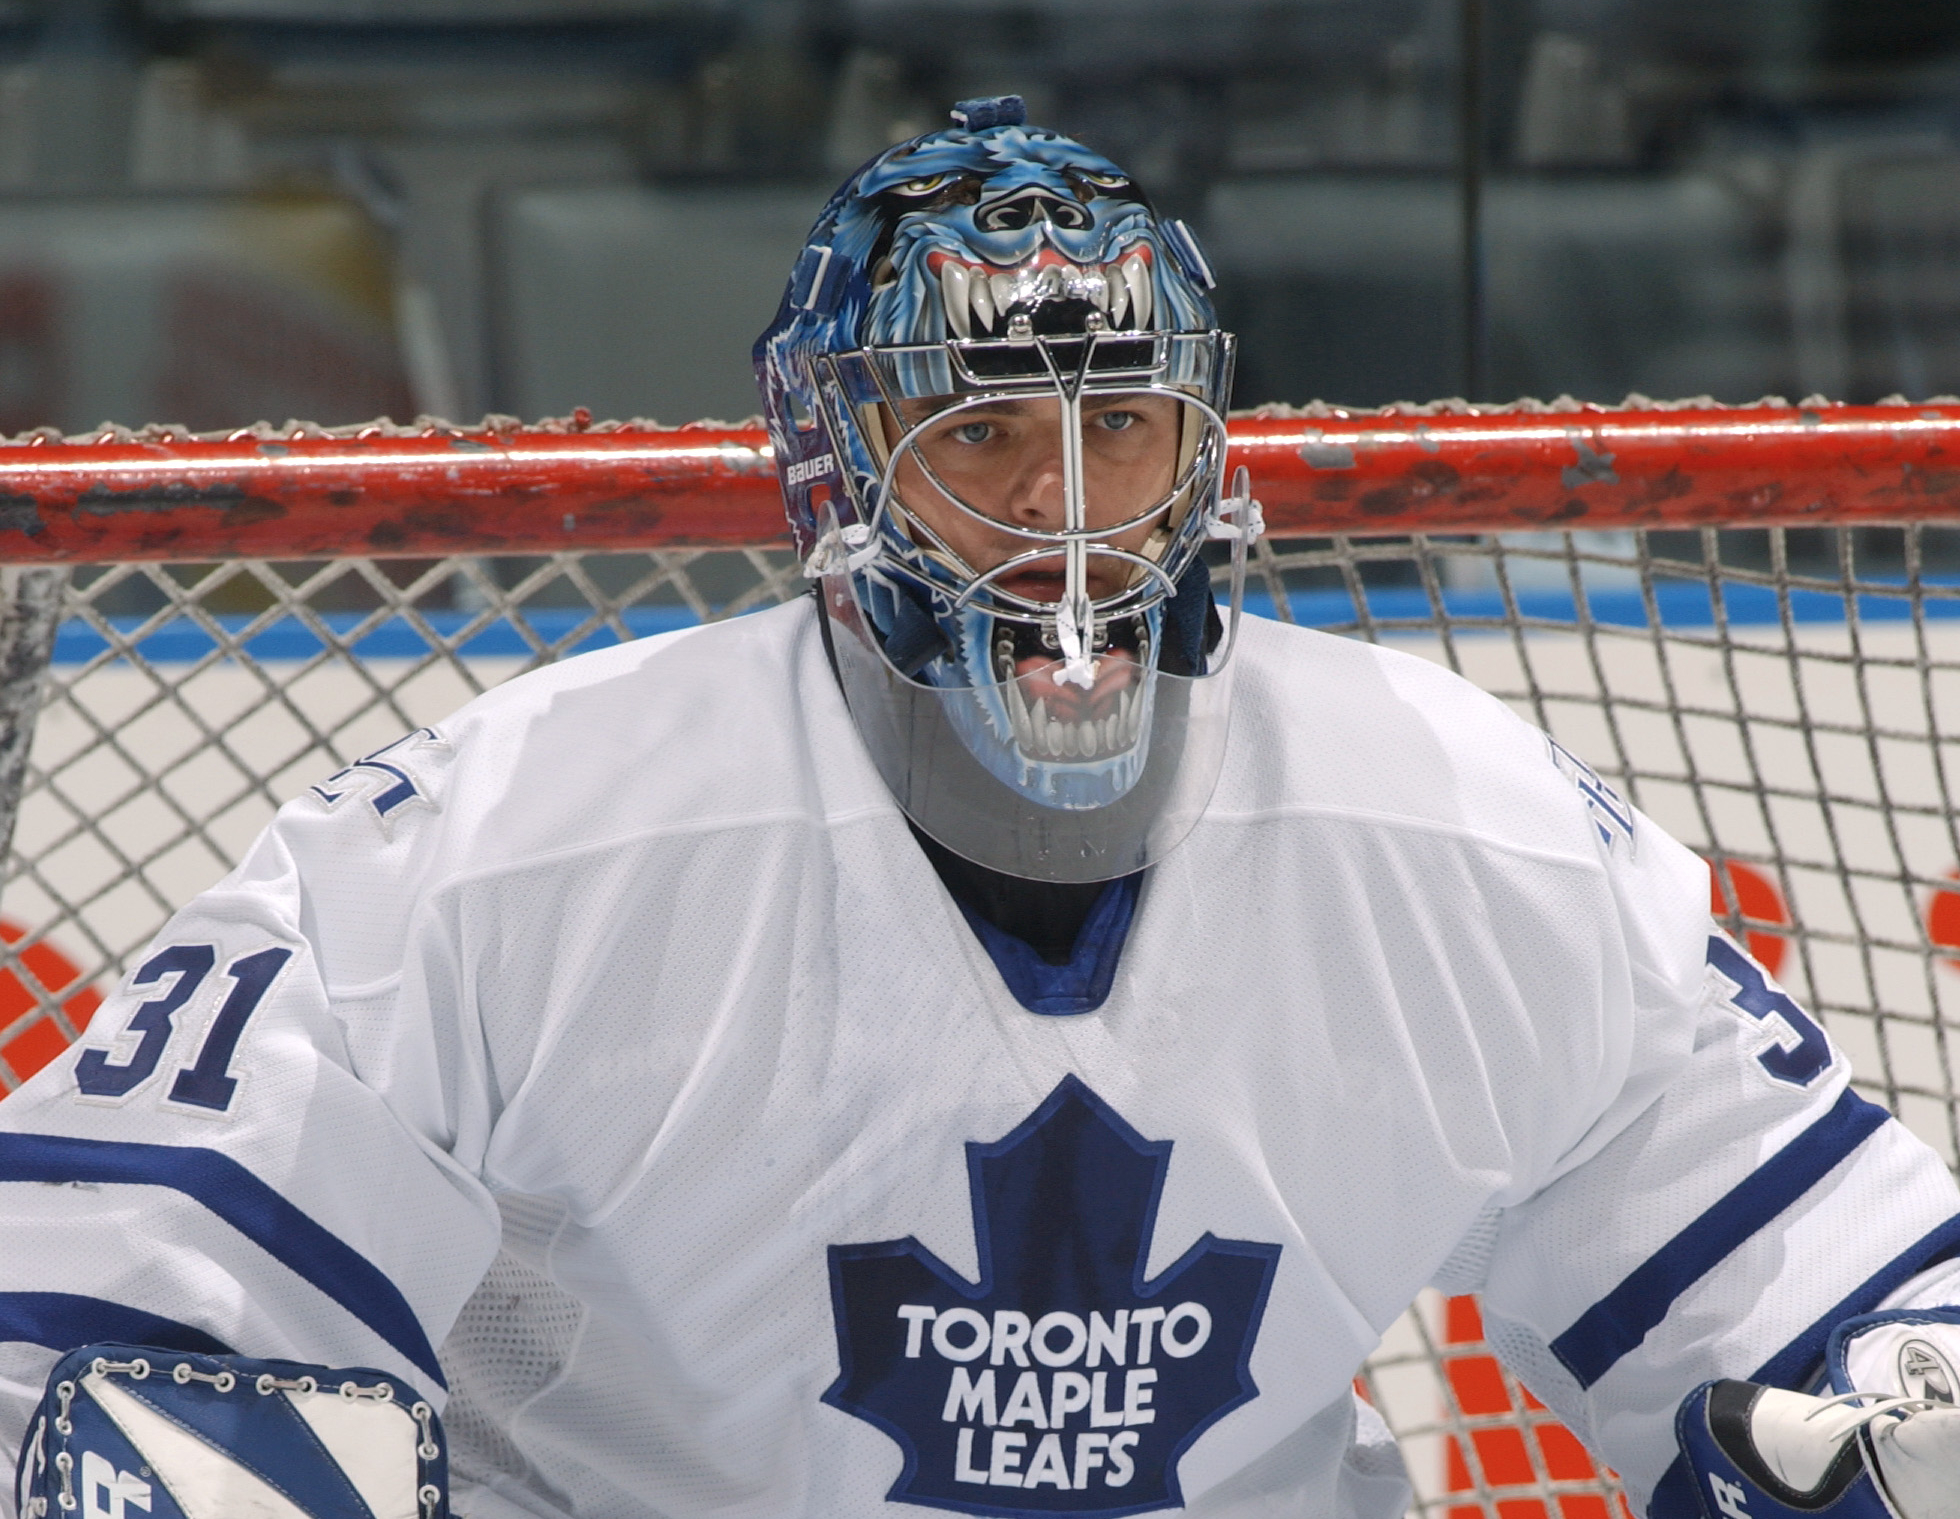 Long-time Leafs goalie Curtis Joseph to retire